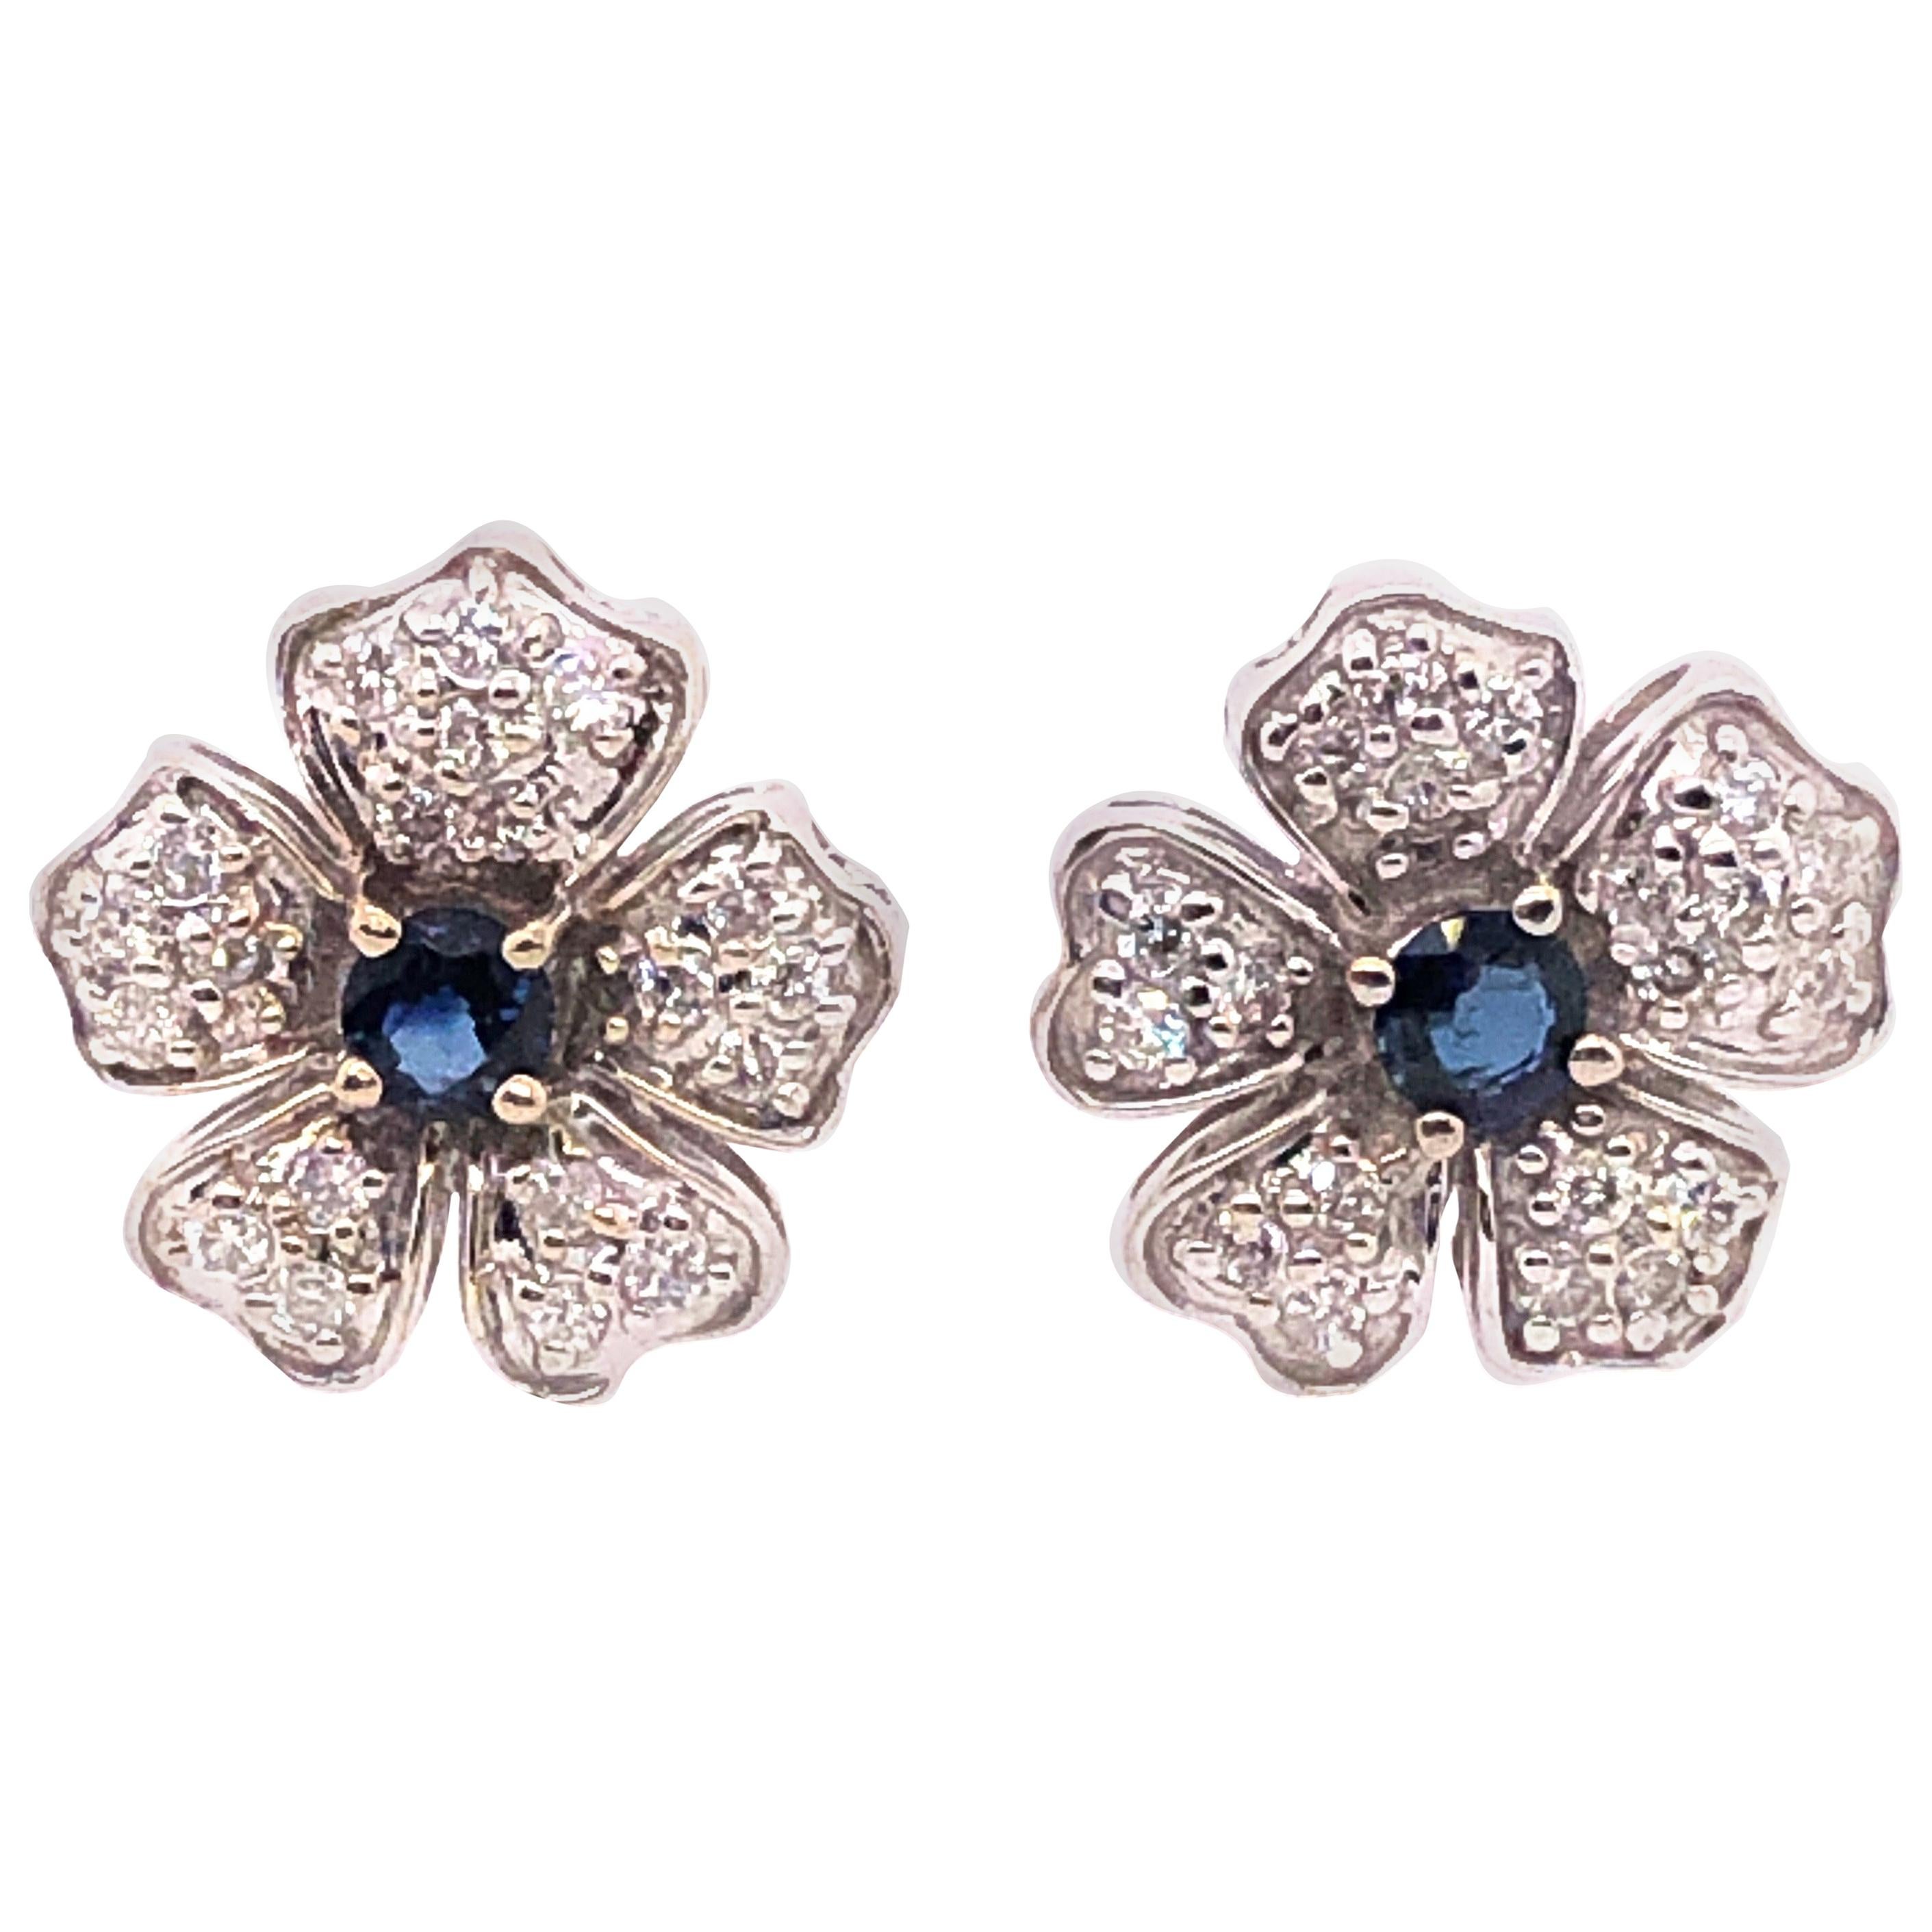 14 Karat White Gold Diamond and Sapphire Flower Stud / Button Earrings For Sale